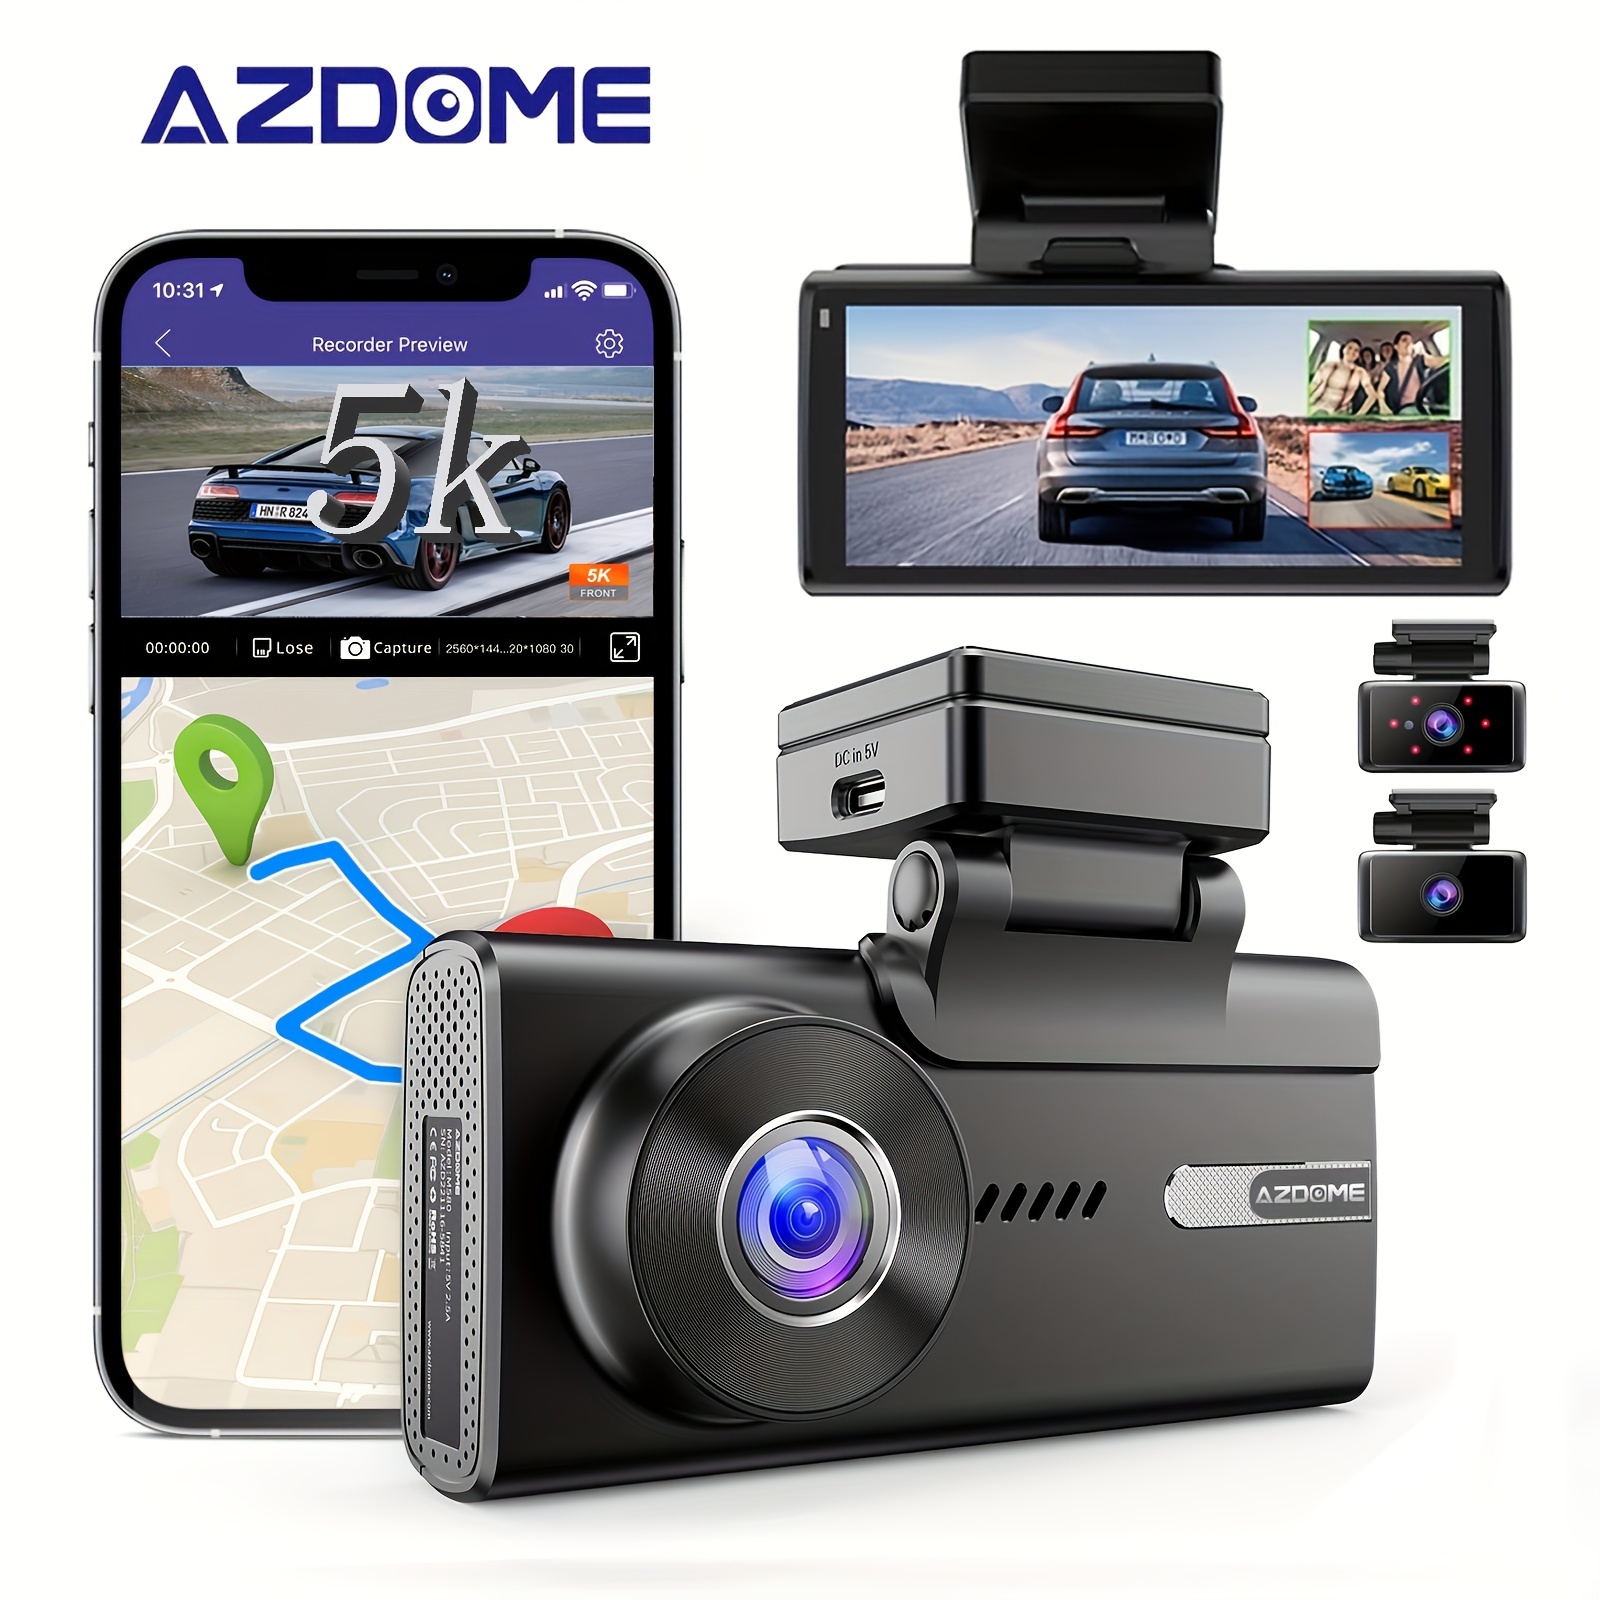 Dash Cam WiFi 2.5K Dual Dash Cam Front and Inside, Parking Mode, Loop  Recording Dash Camera Driving Recorder with GPS and Speed 